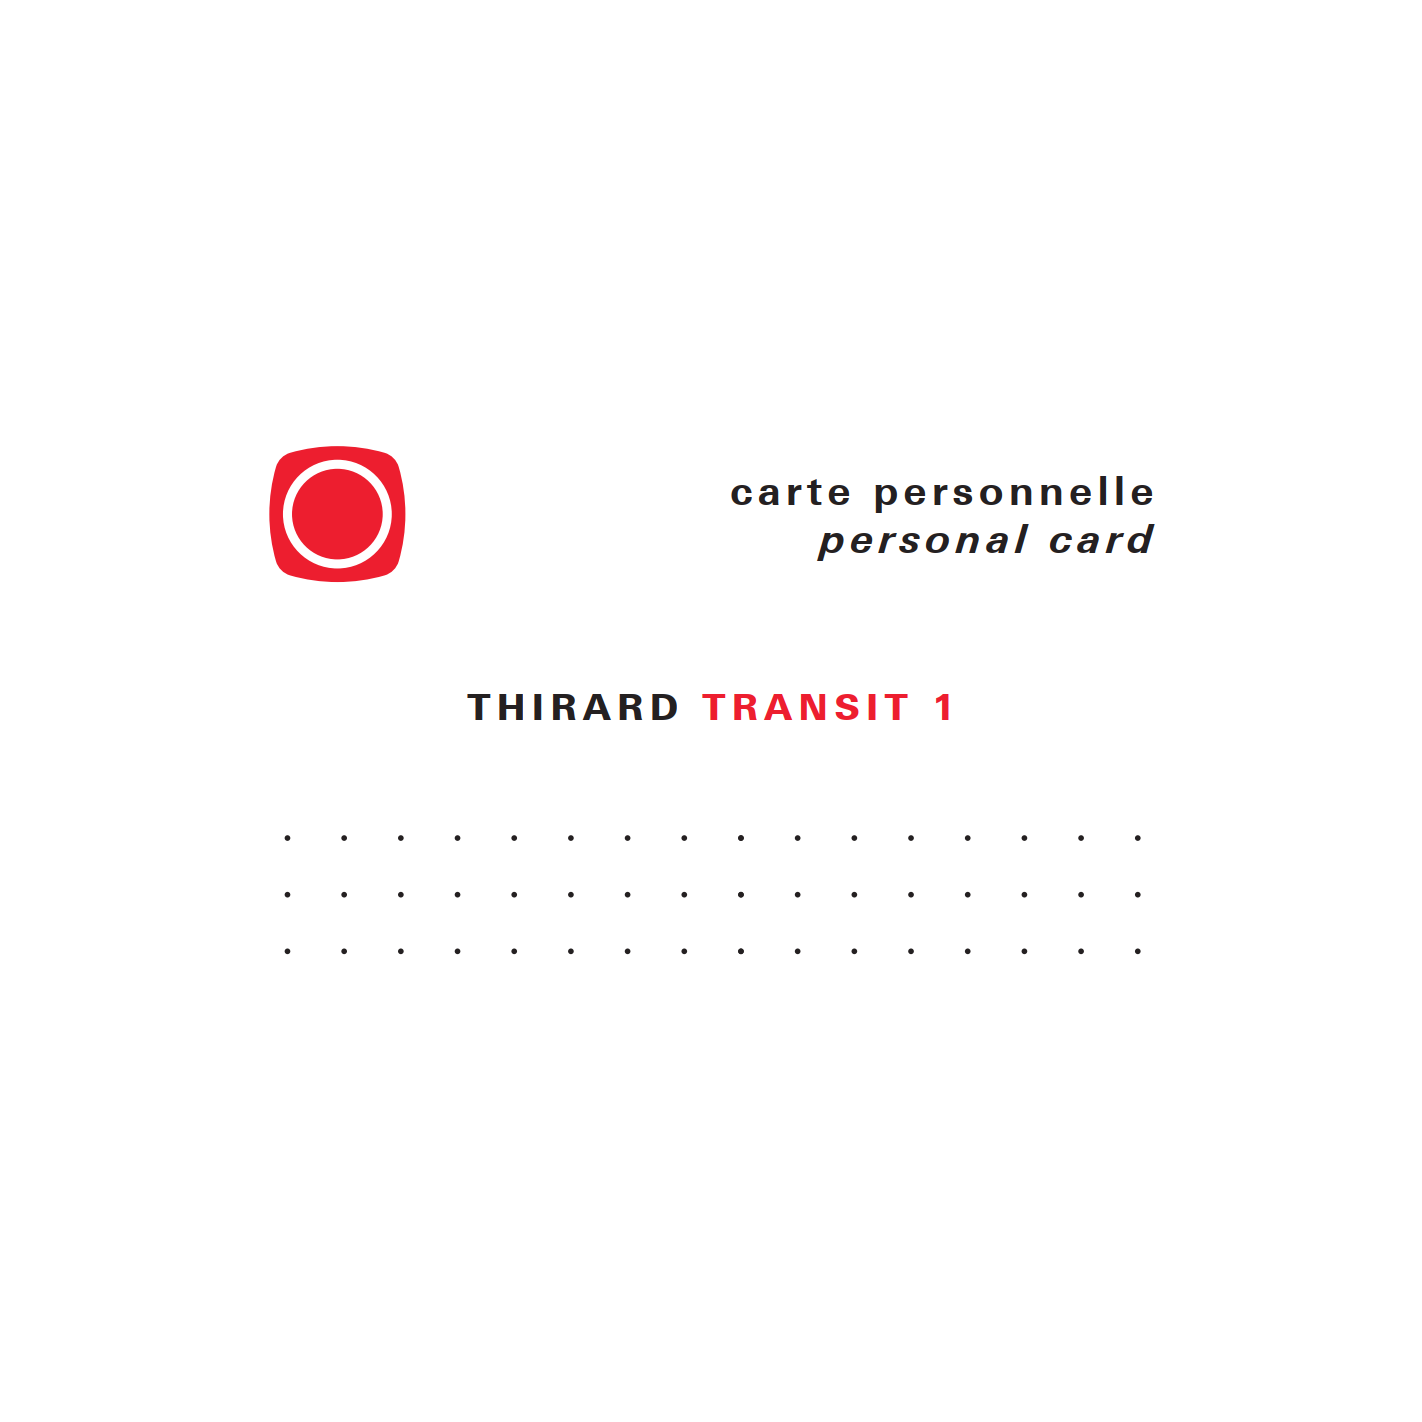 THIRARD - Cylindre 35x50 mm 5 clés longues fonction urgence 4